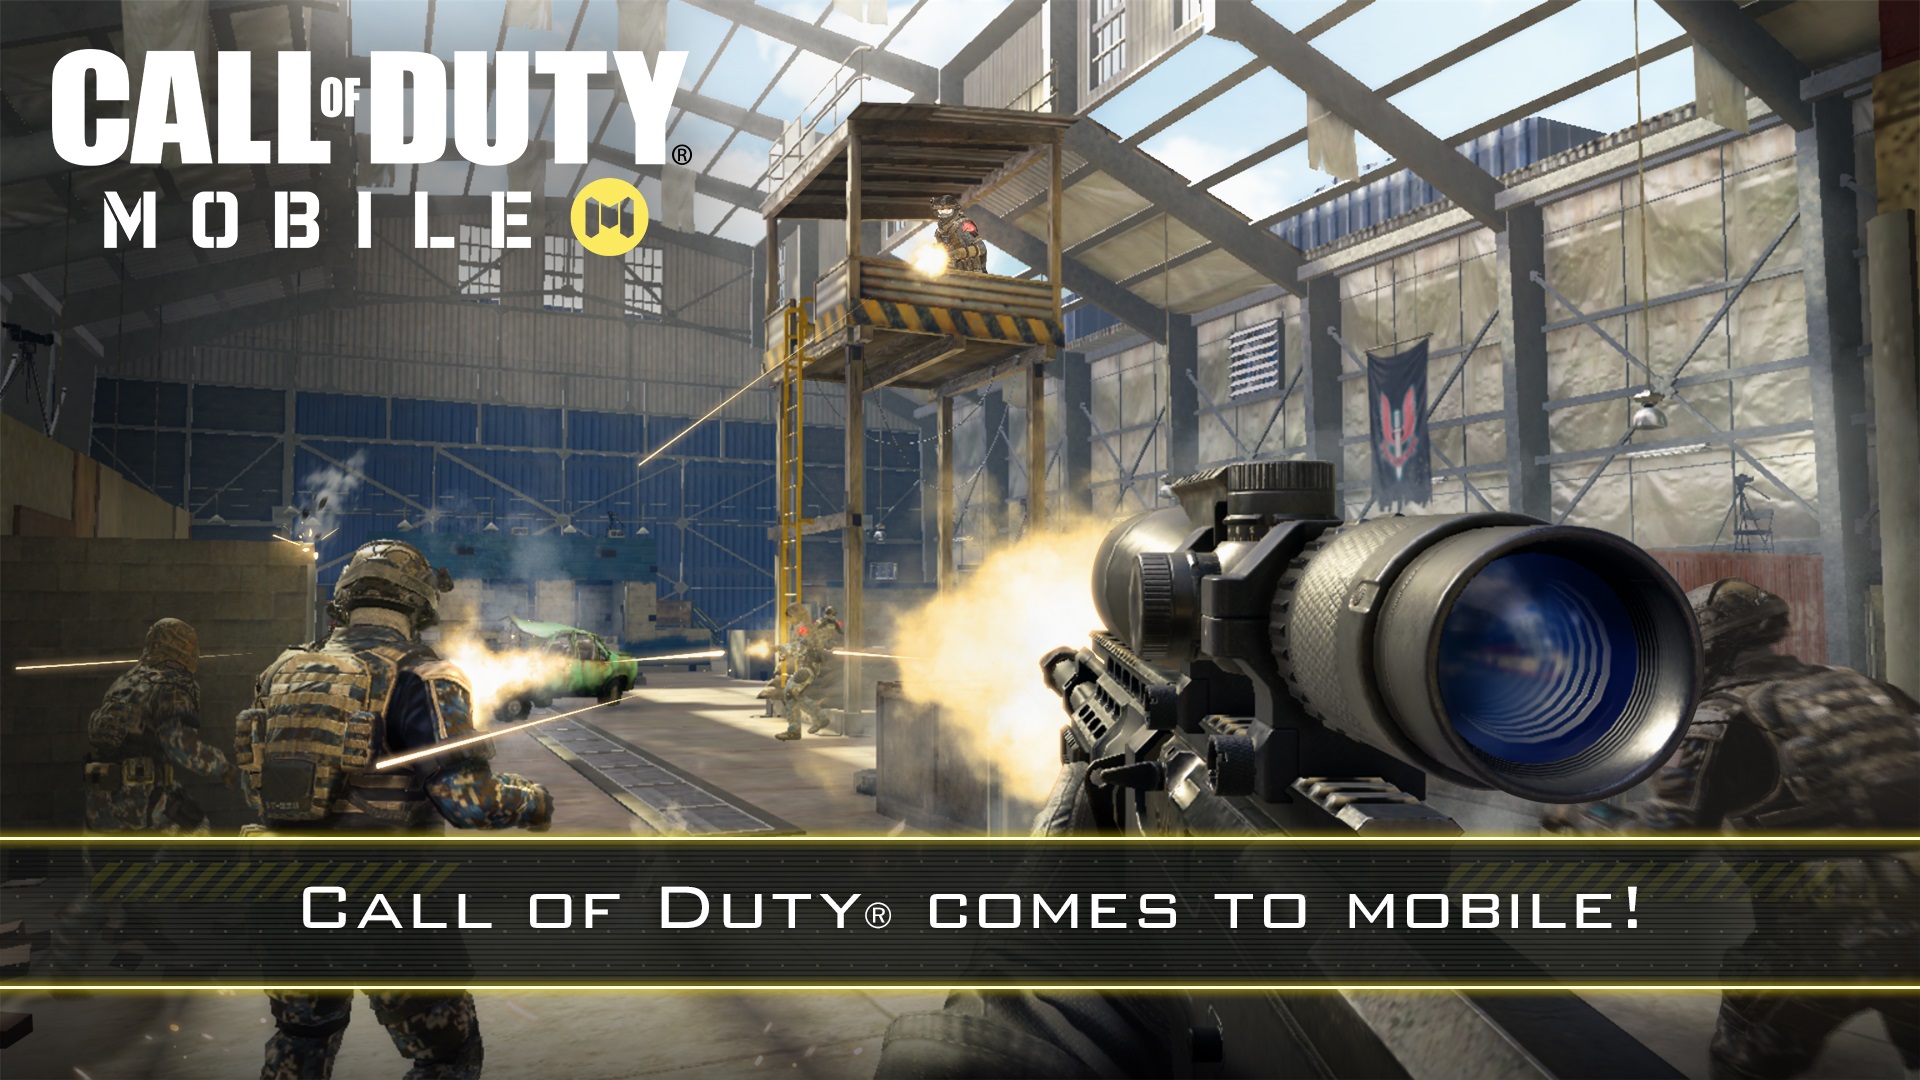 🙁 new method 9999 🙁 Call Of Duty Mobile Release Date In India 2019 bit.ly/codmobilemod